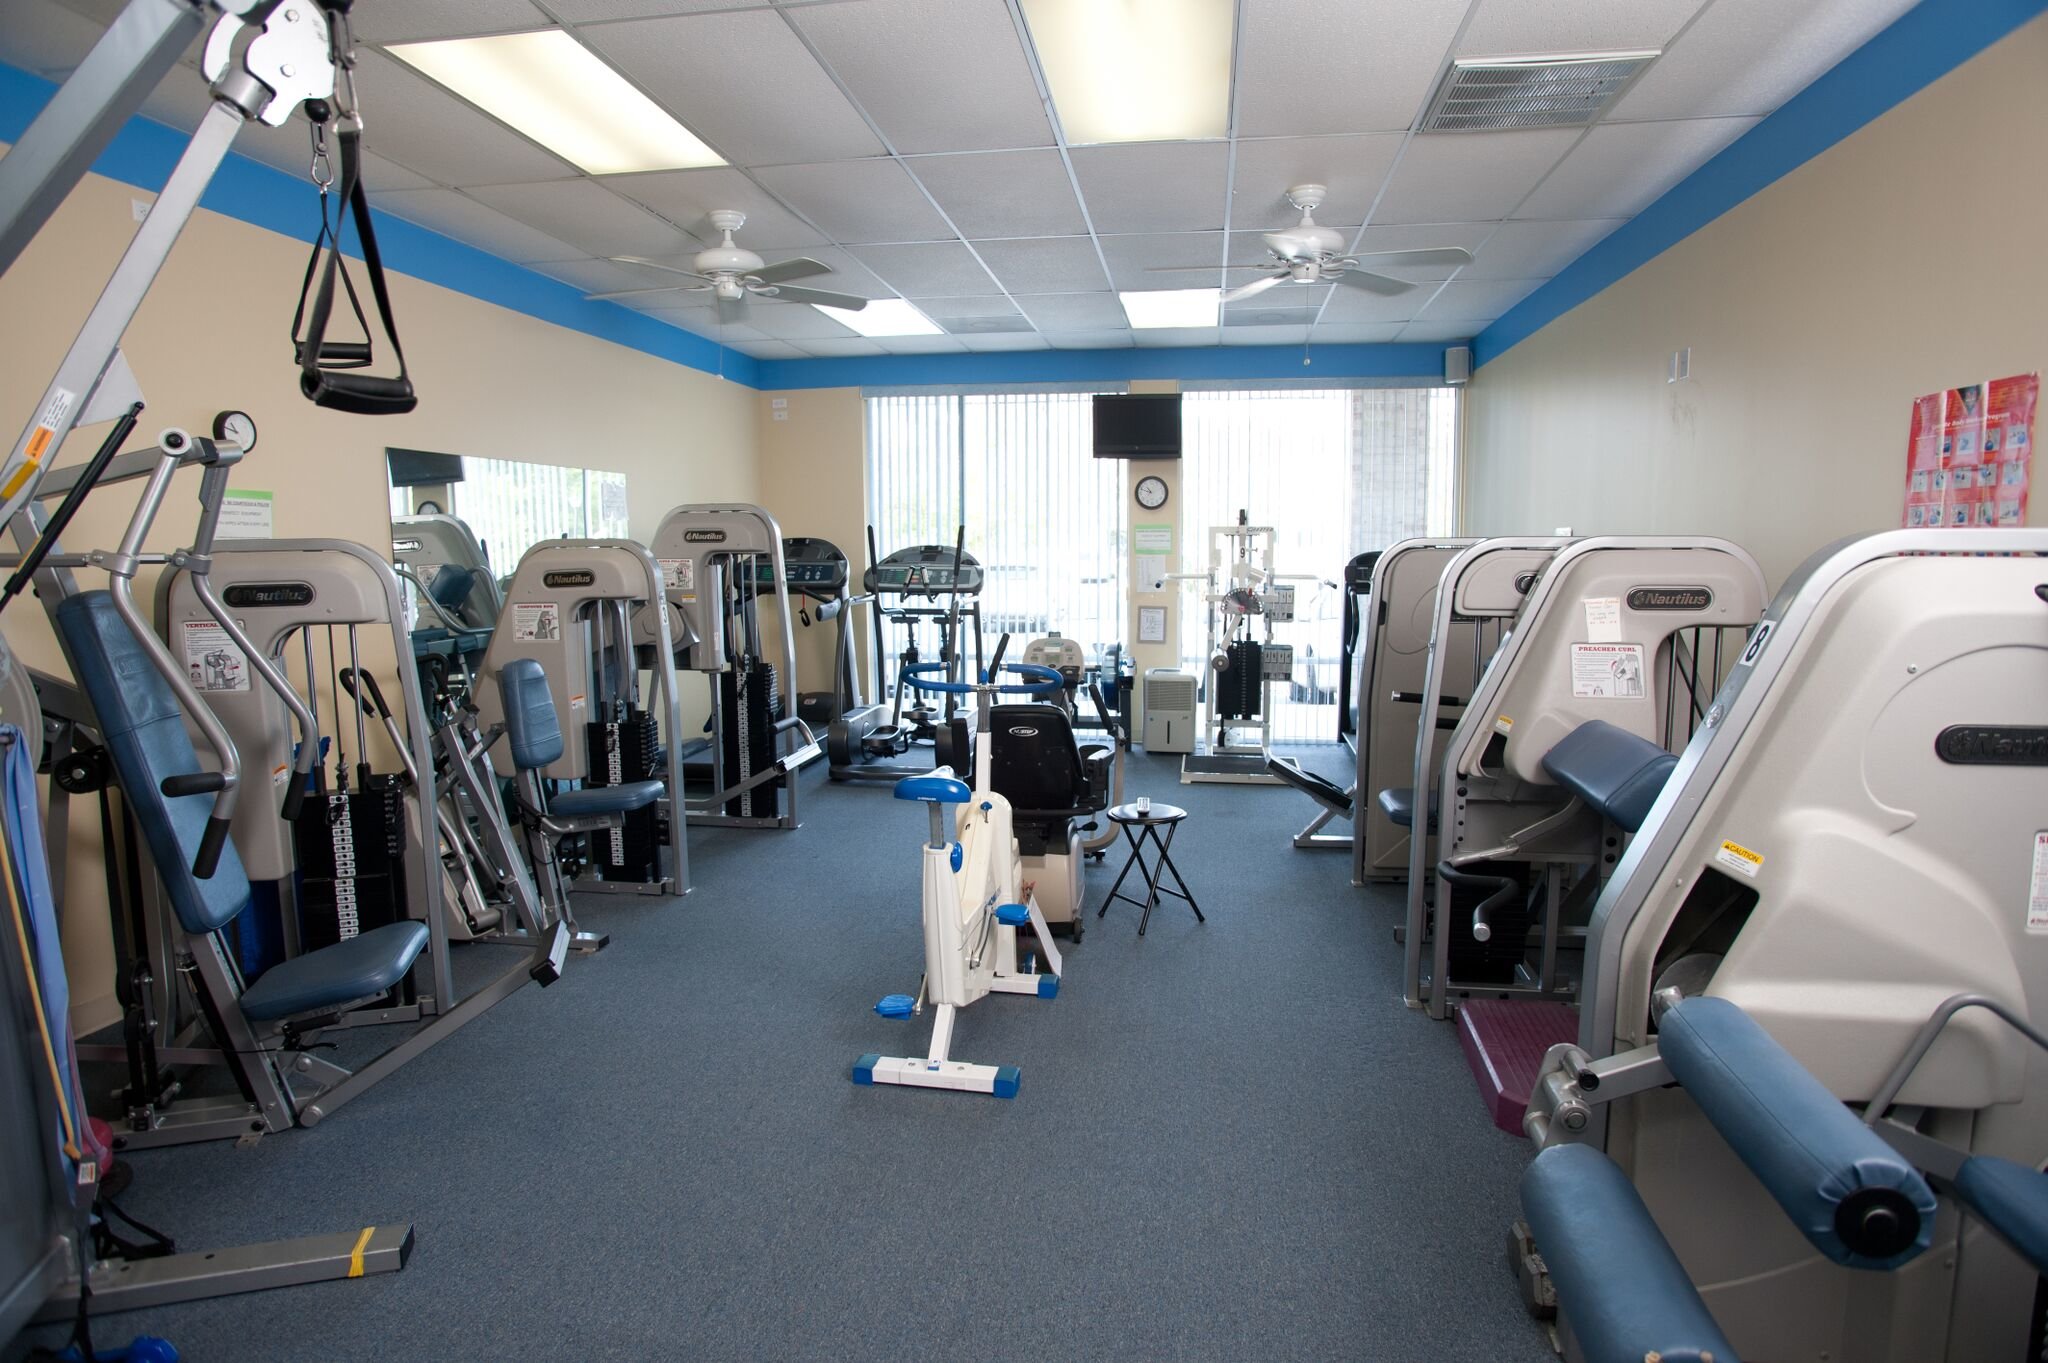 Ocean City Aquatic And Fitness Center Rates All Photos Fitness